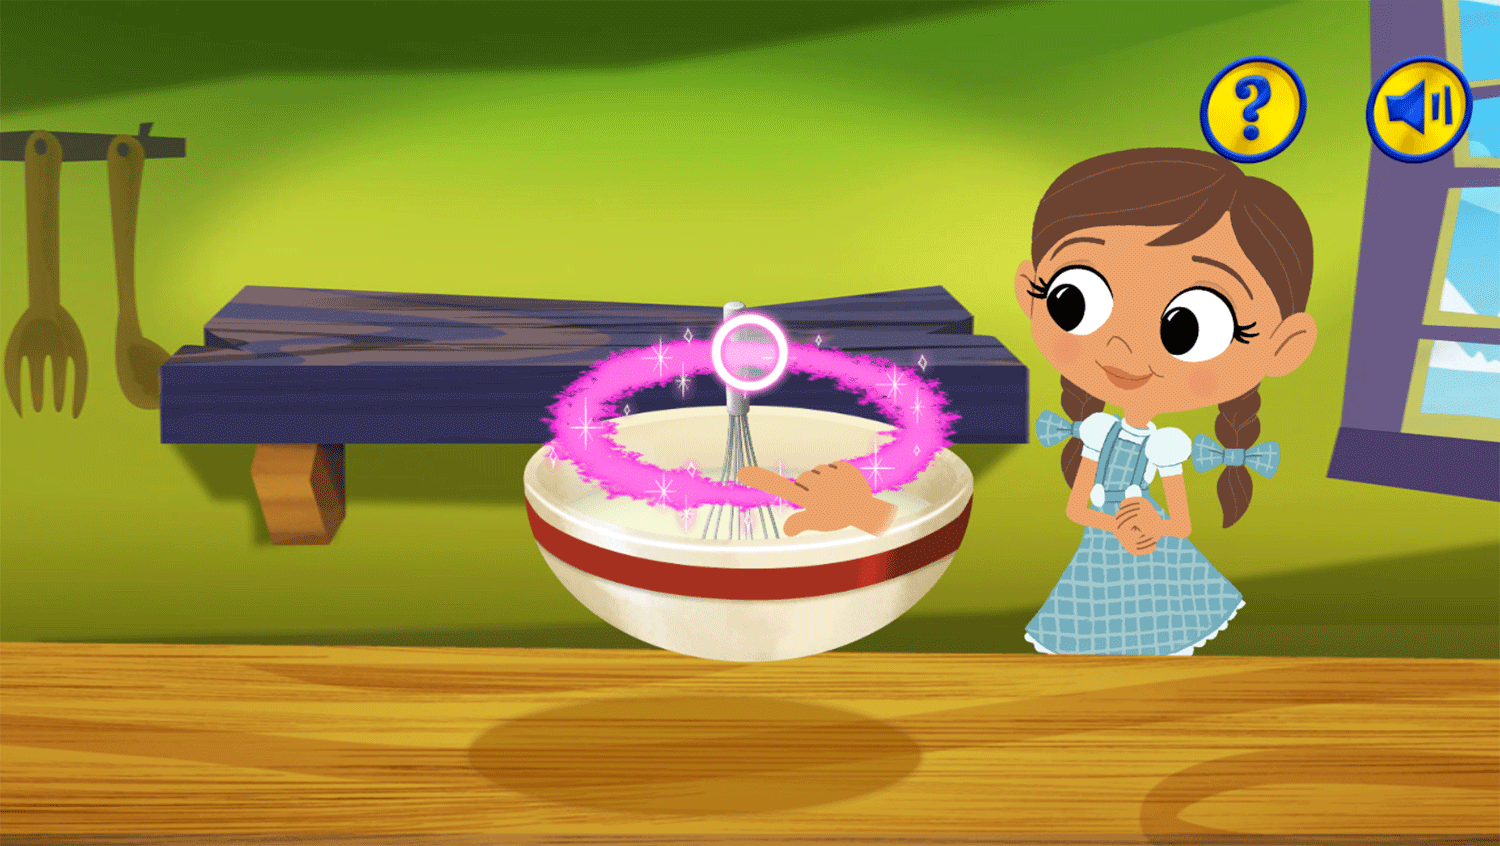 Dorothy and the Wizard of Oz Cookie Magic Game Mix Ingredients Screenshot.